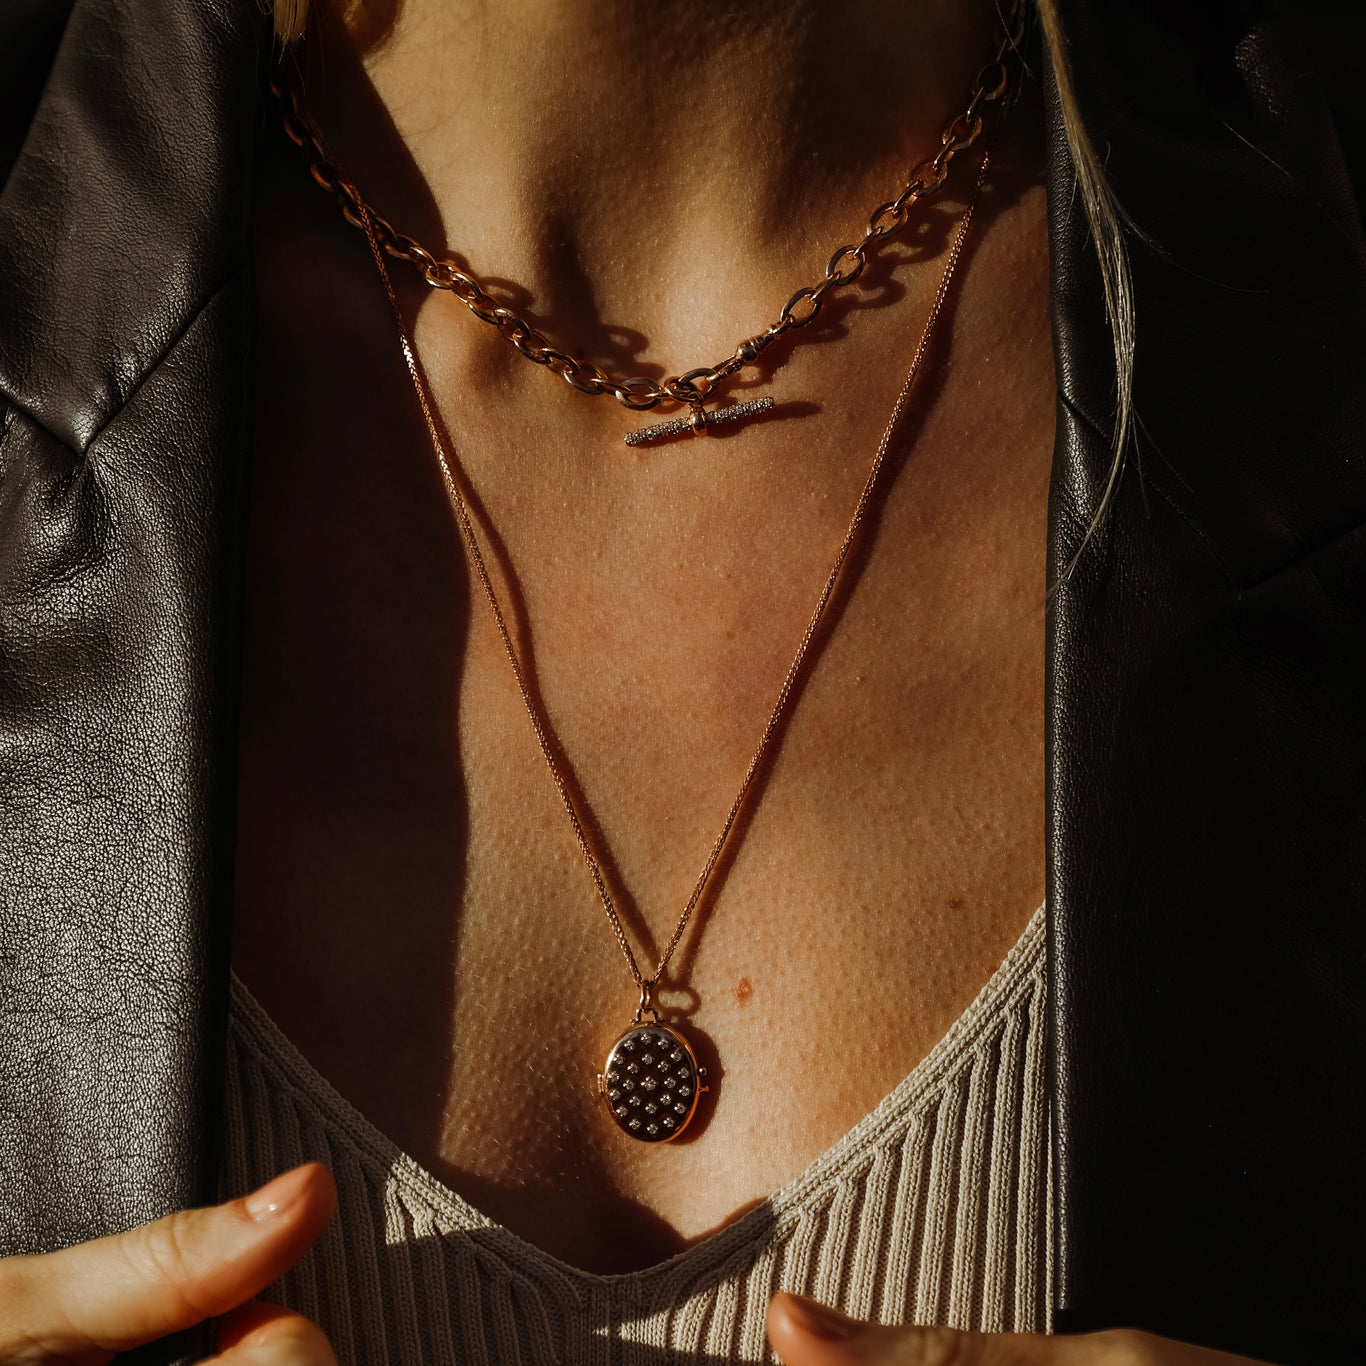 Etoile Locket shown with the Pantheon Necklace